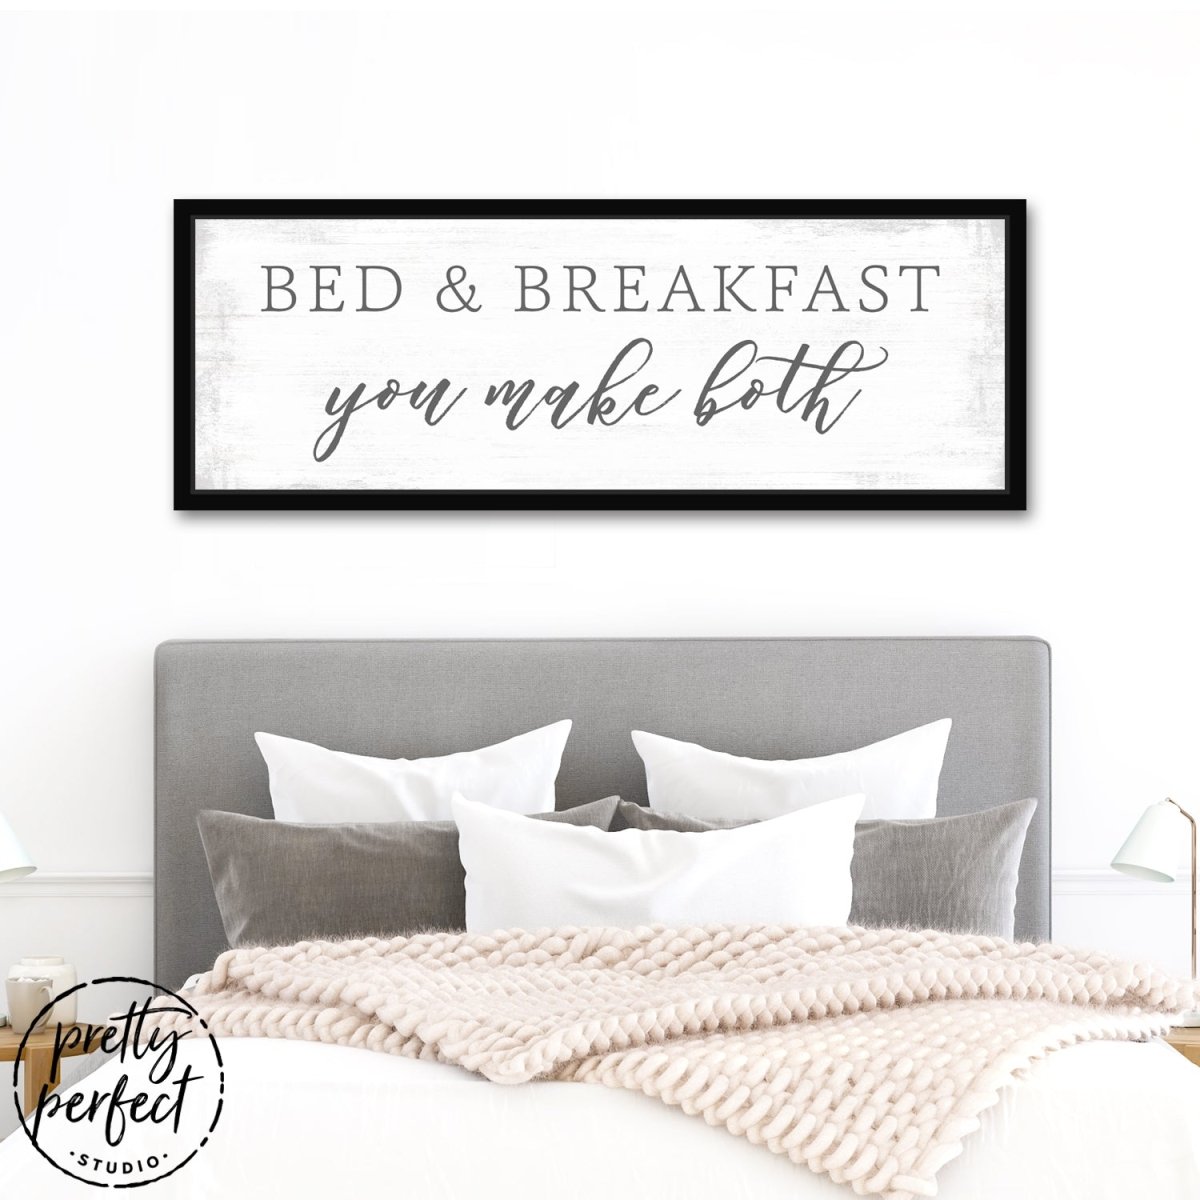 Bed and Breakfast Bedroom Wall Decor Above Bed - Pretty Perfect Studio